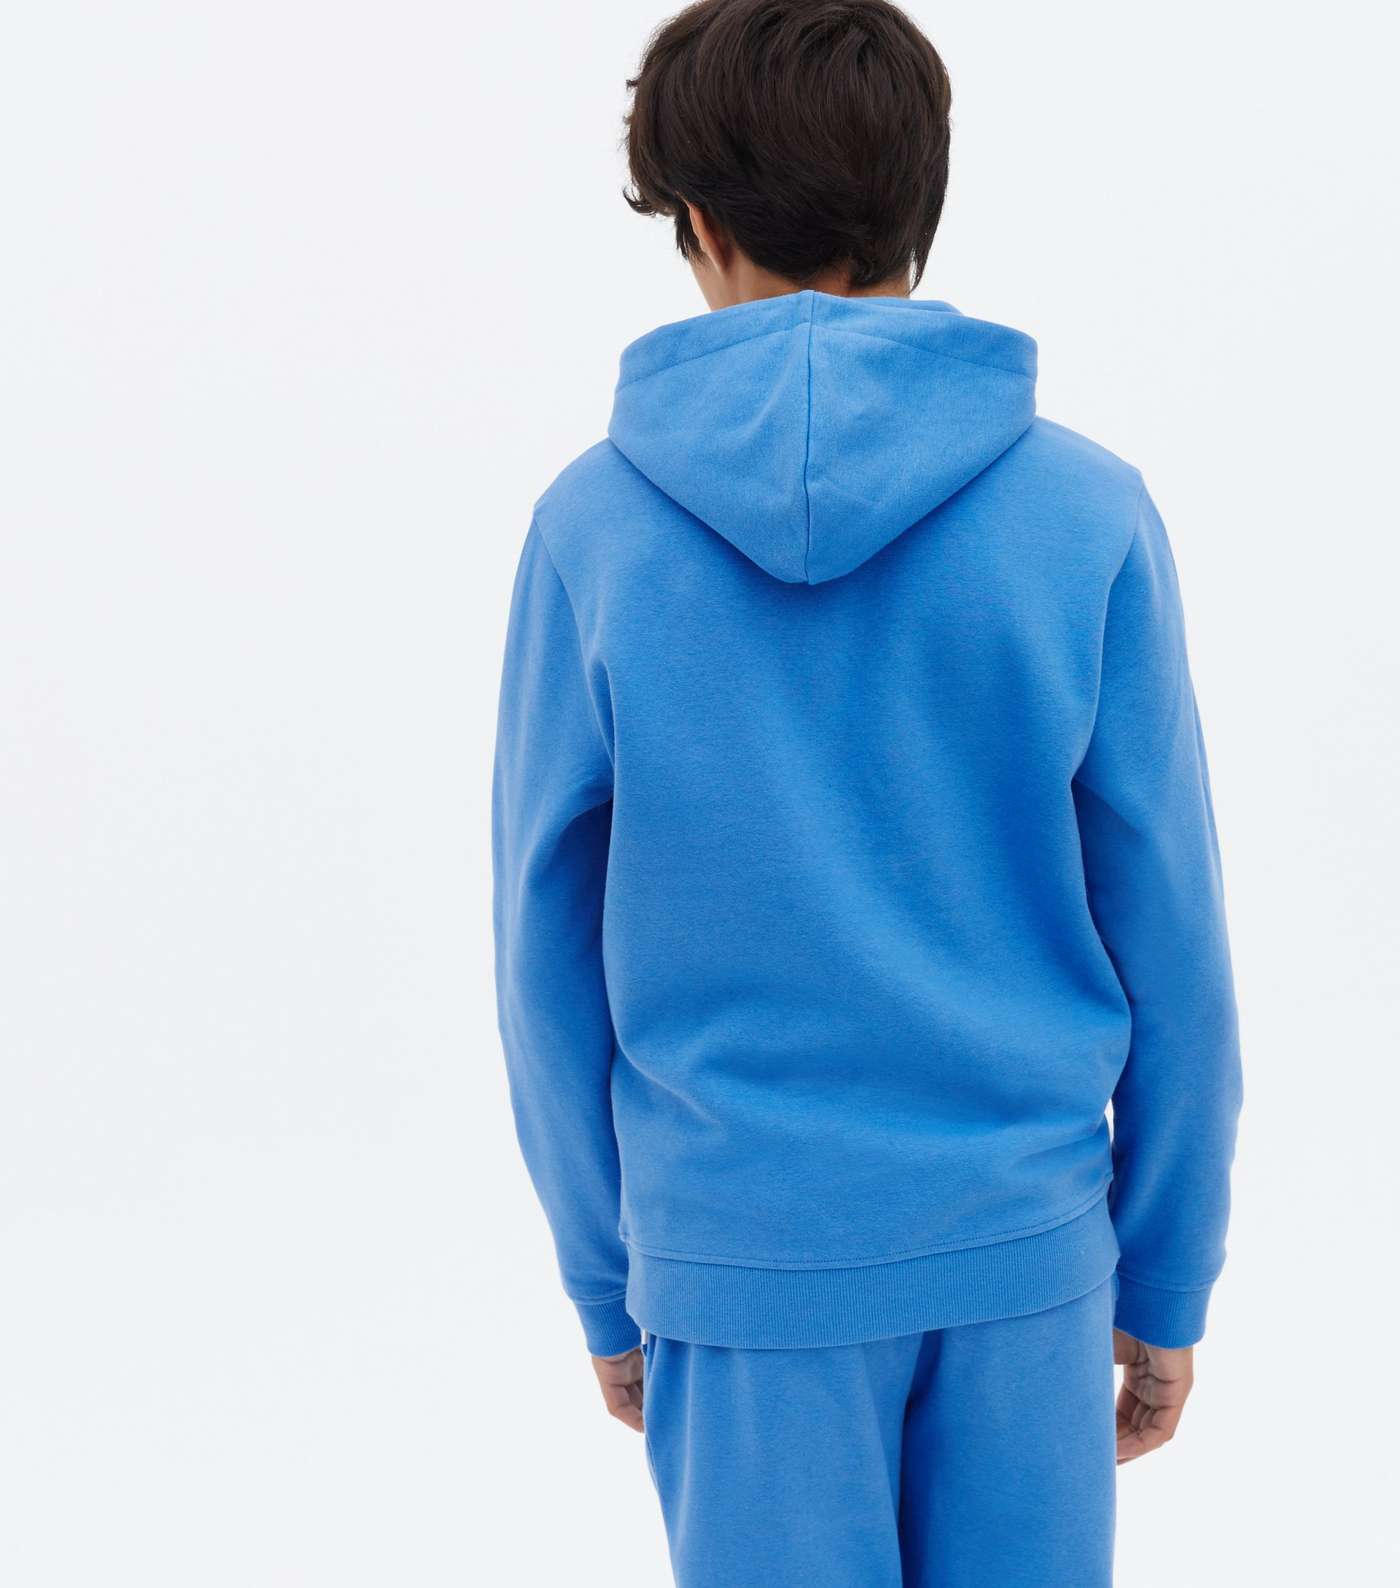 Boys Bright Blue Jersey Pocket Front Hoodie Image 4